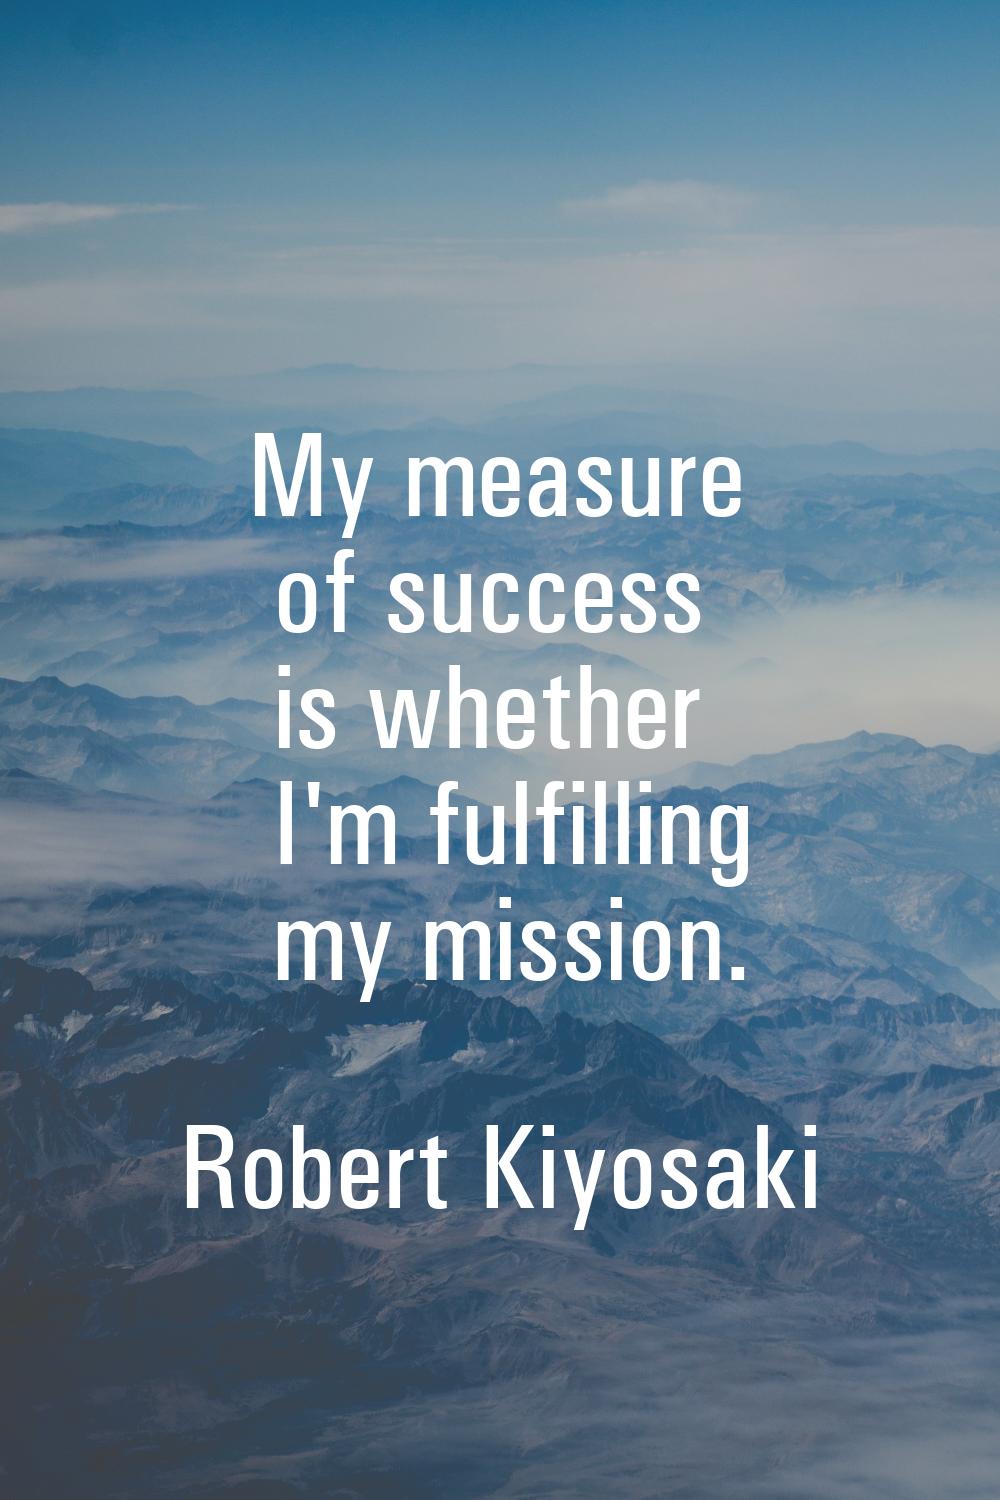 My measure of success is whether I'm fulfilling my mission.